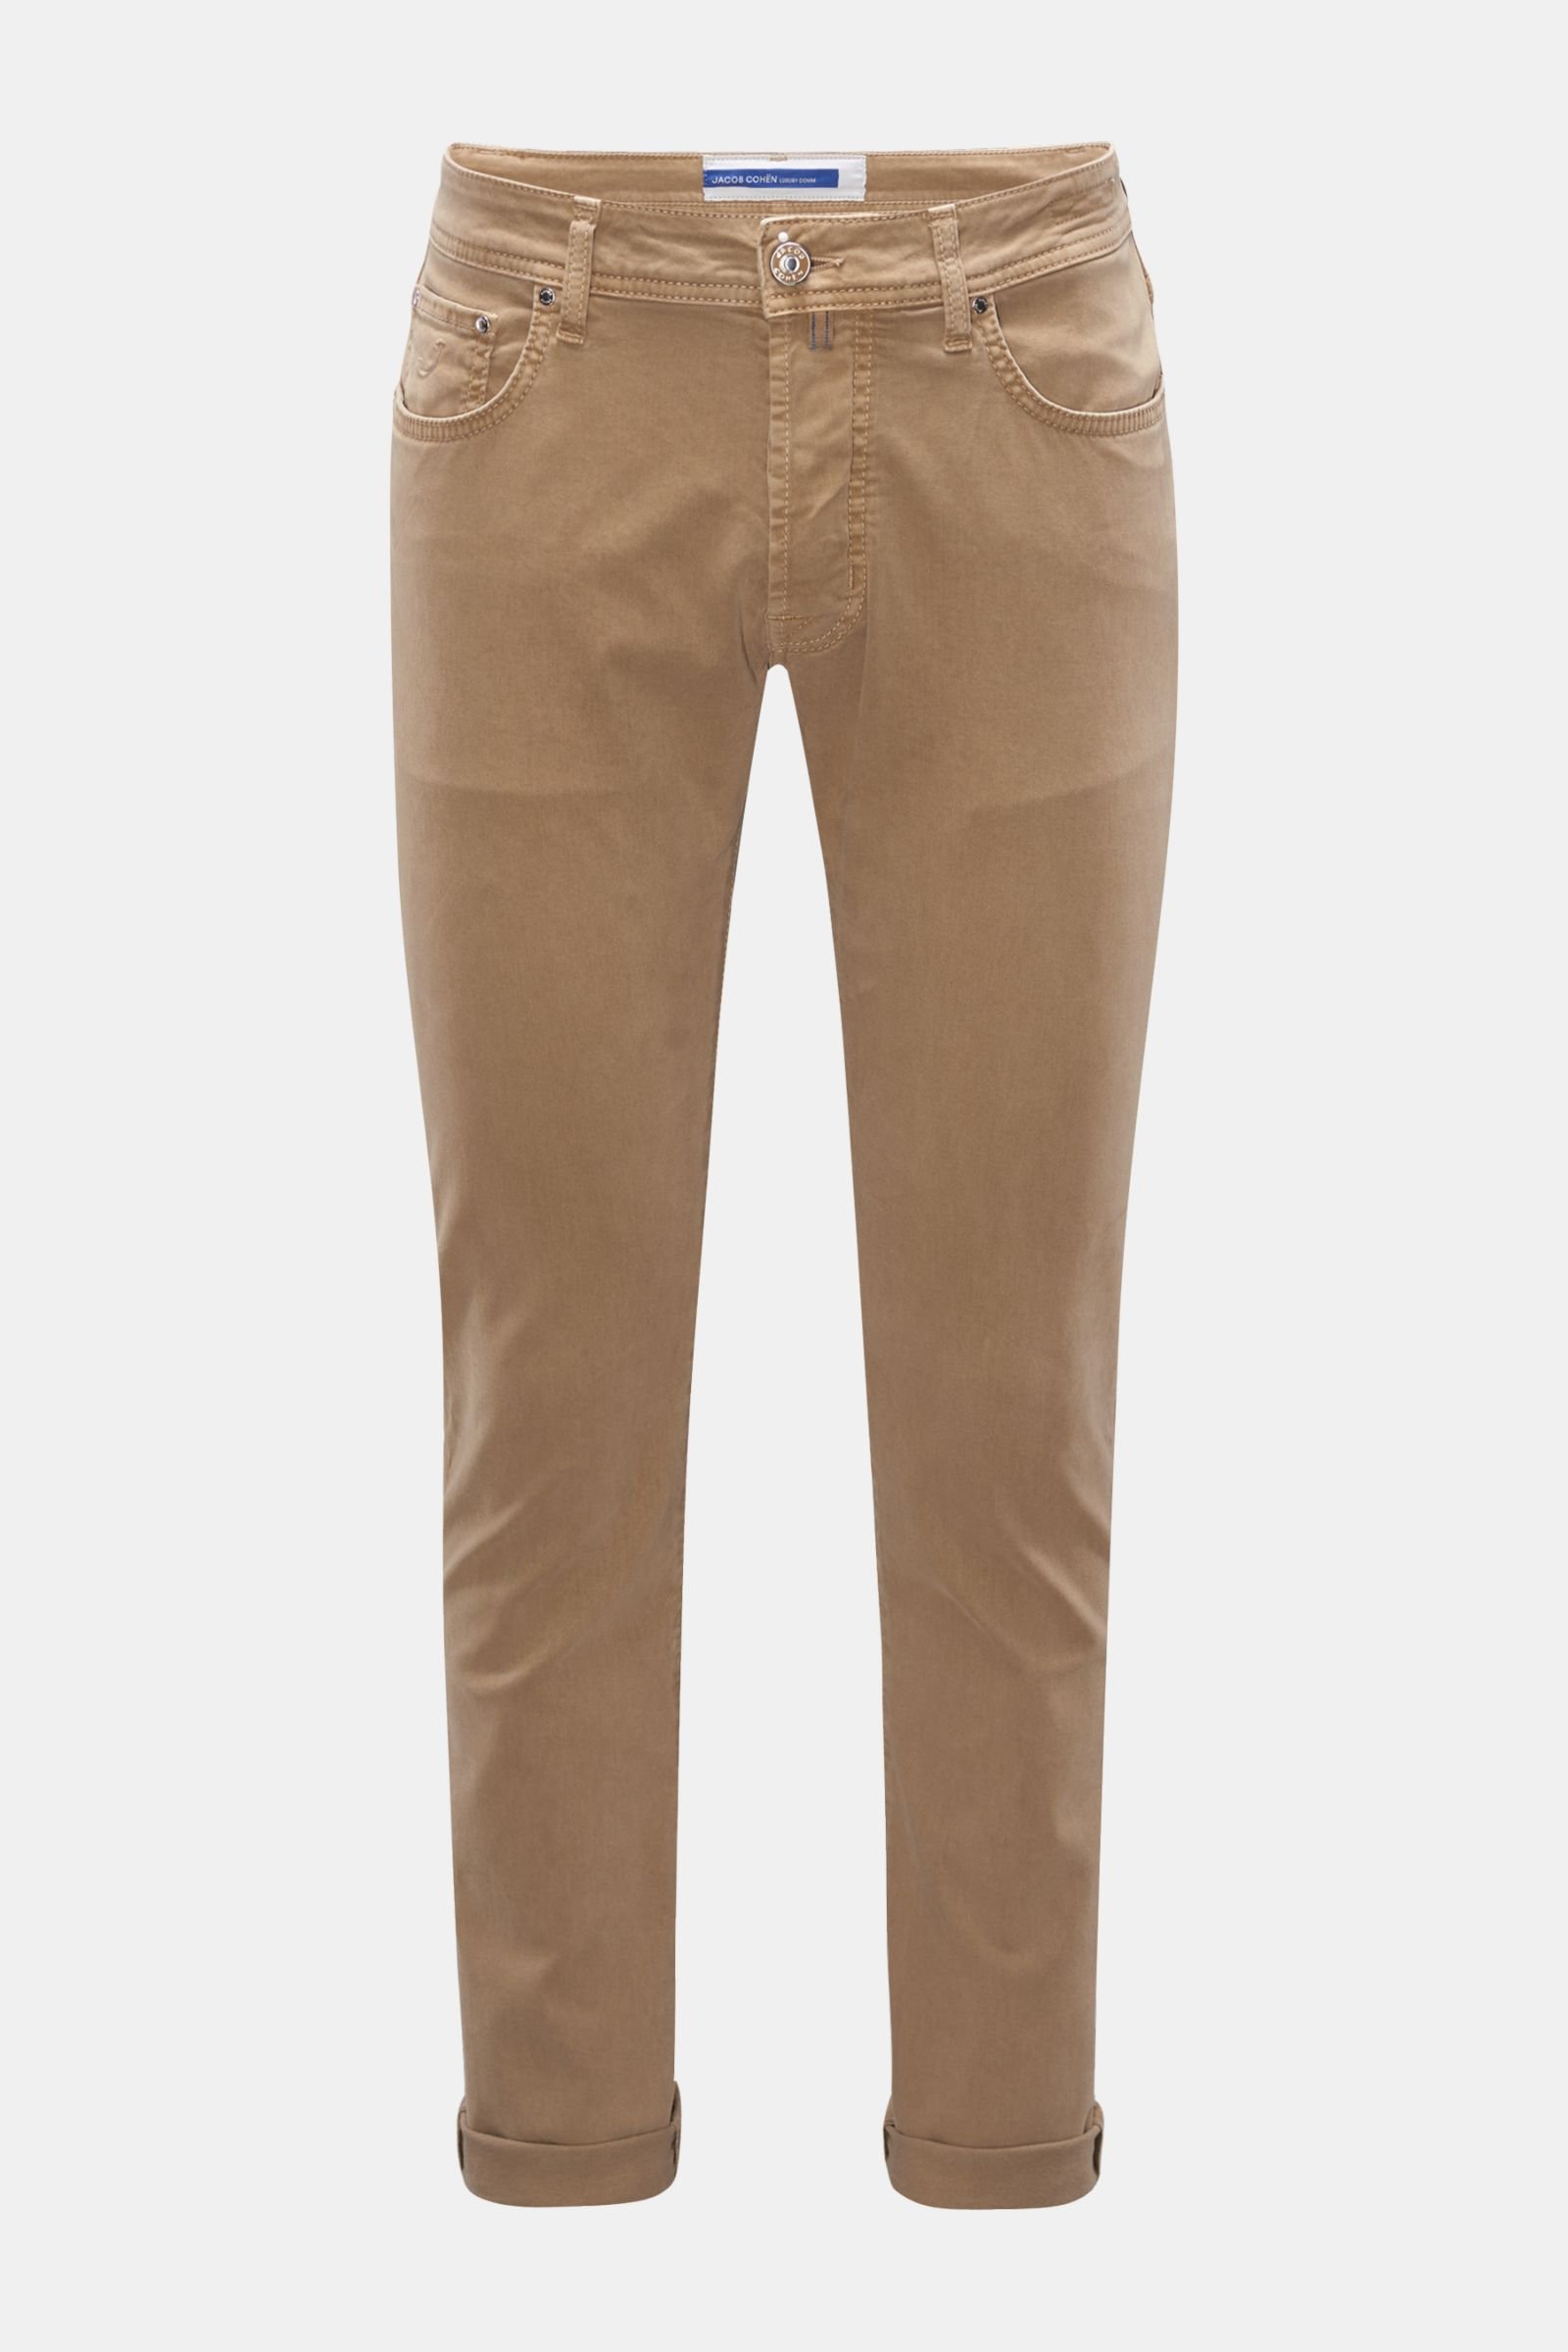 Cotton trousers 'Bard' light brown (formerly J688)